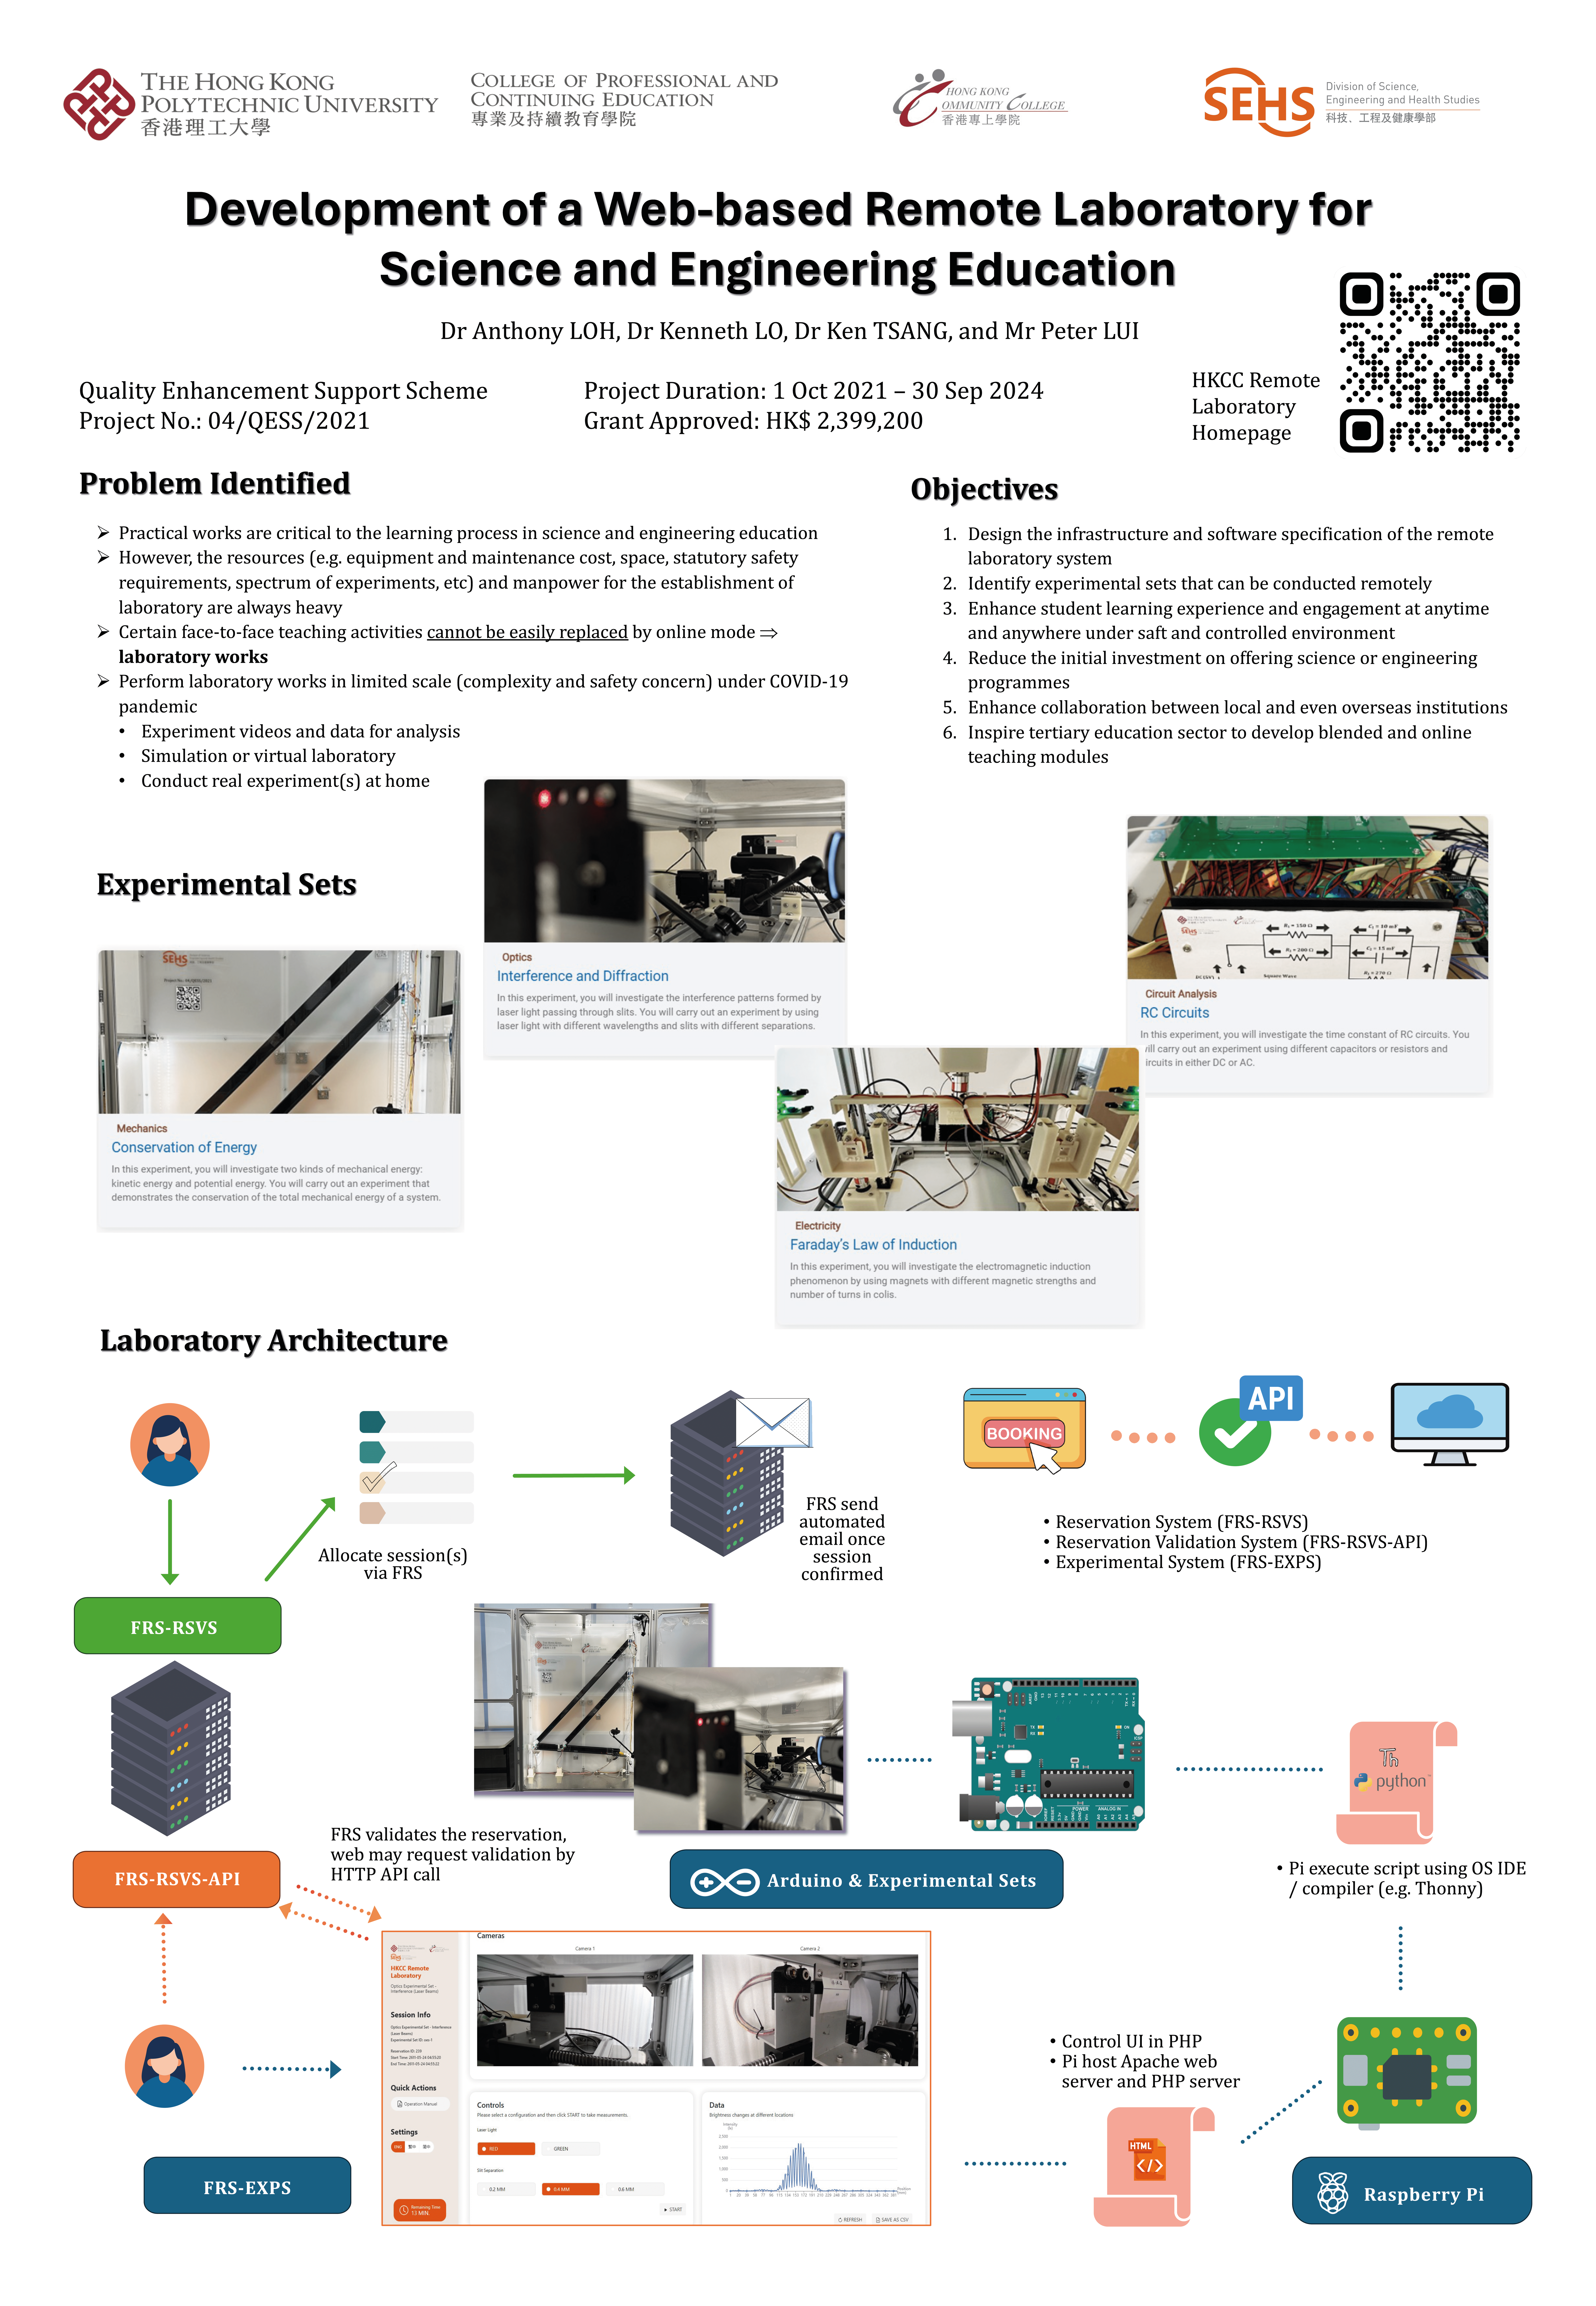  Development of a Web-based Remote Laboratory for Science and Engineering Students (科學與工程教育遙距實驗室)